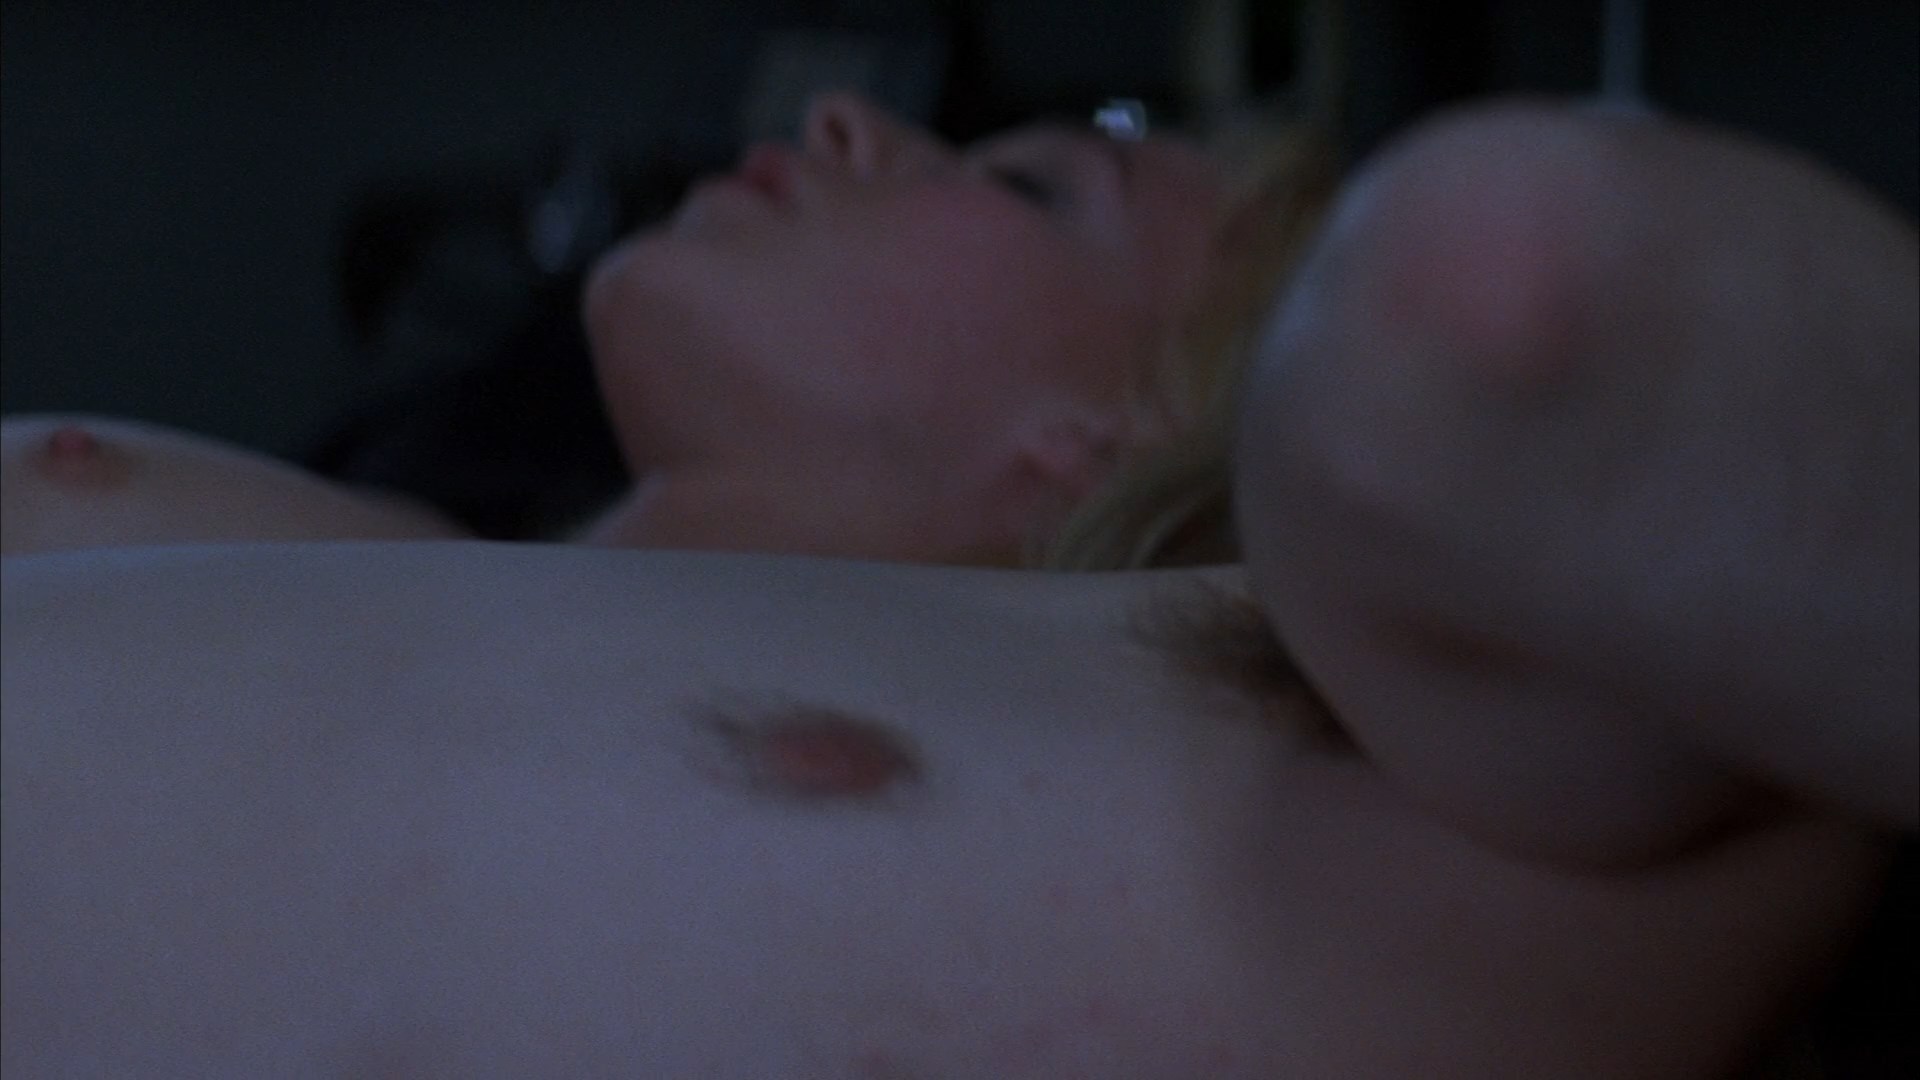 Franka Potente shows her tits while laying on the bed next to some guy. 